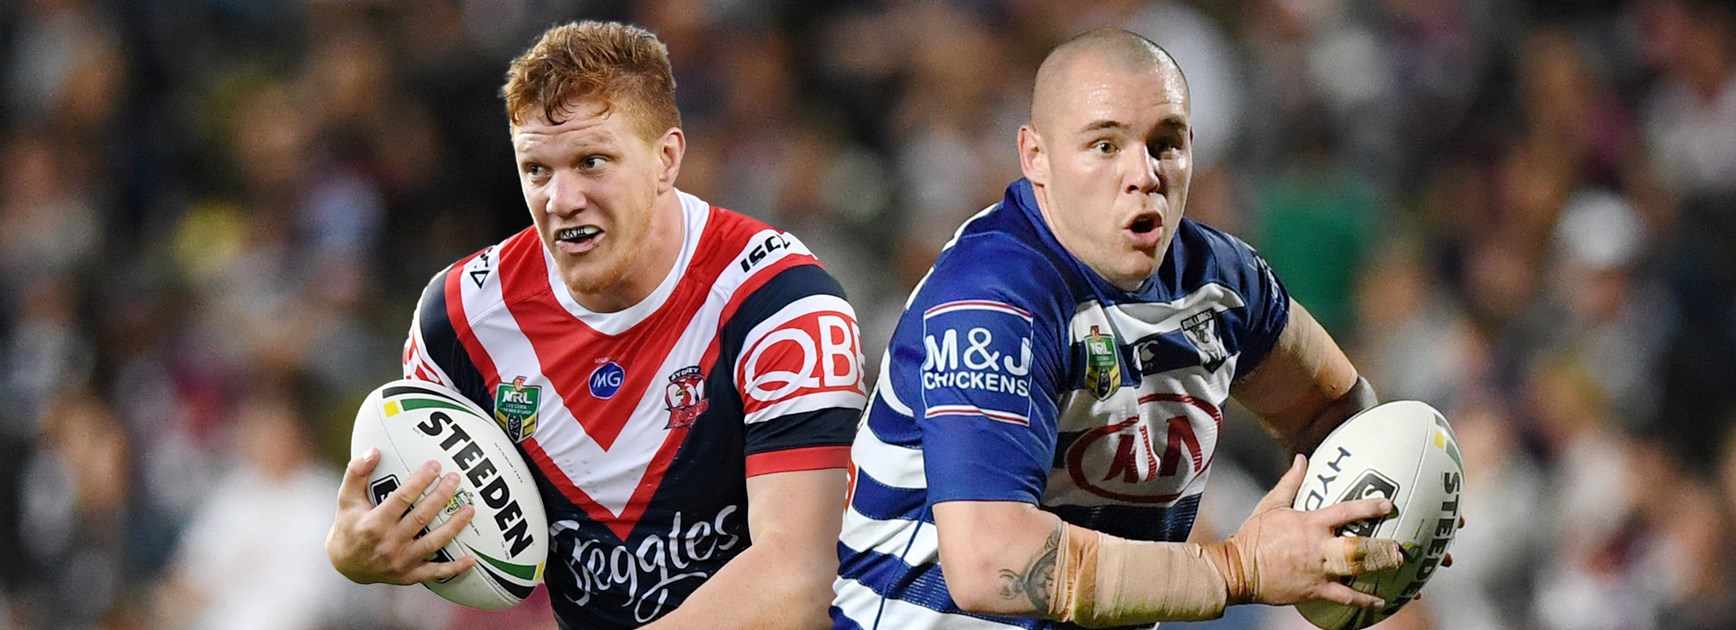 Klemmer signs with Knights, Napa joins Bulldogs